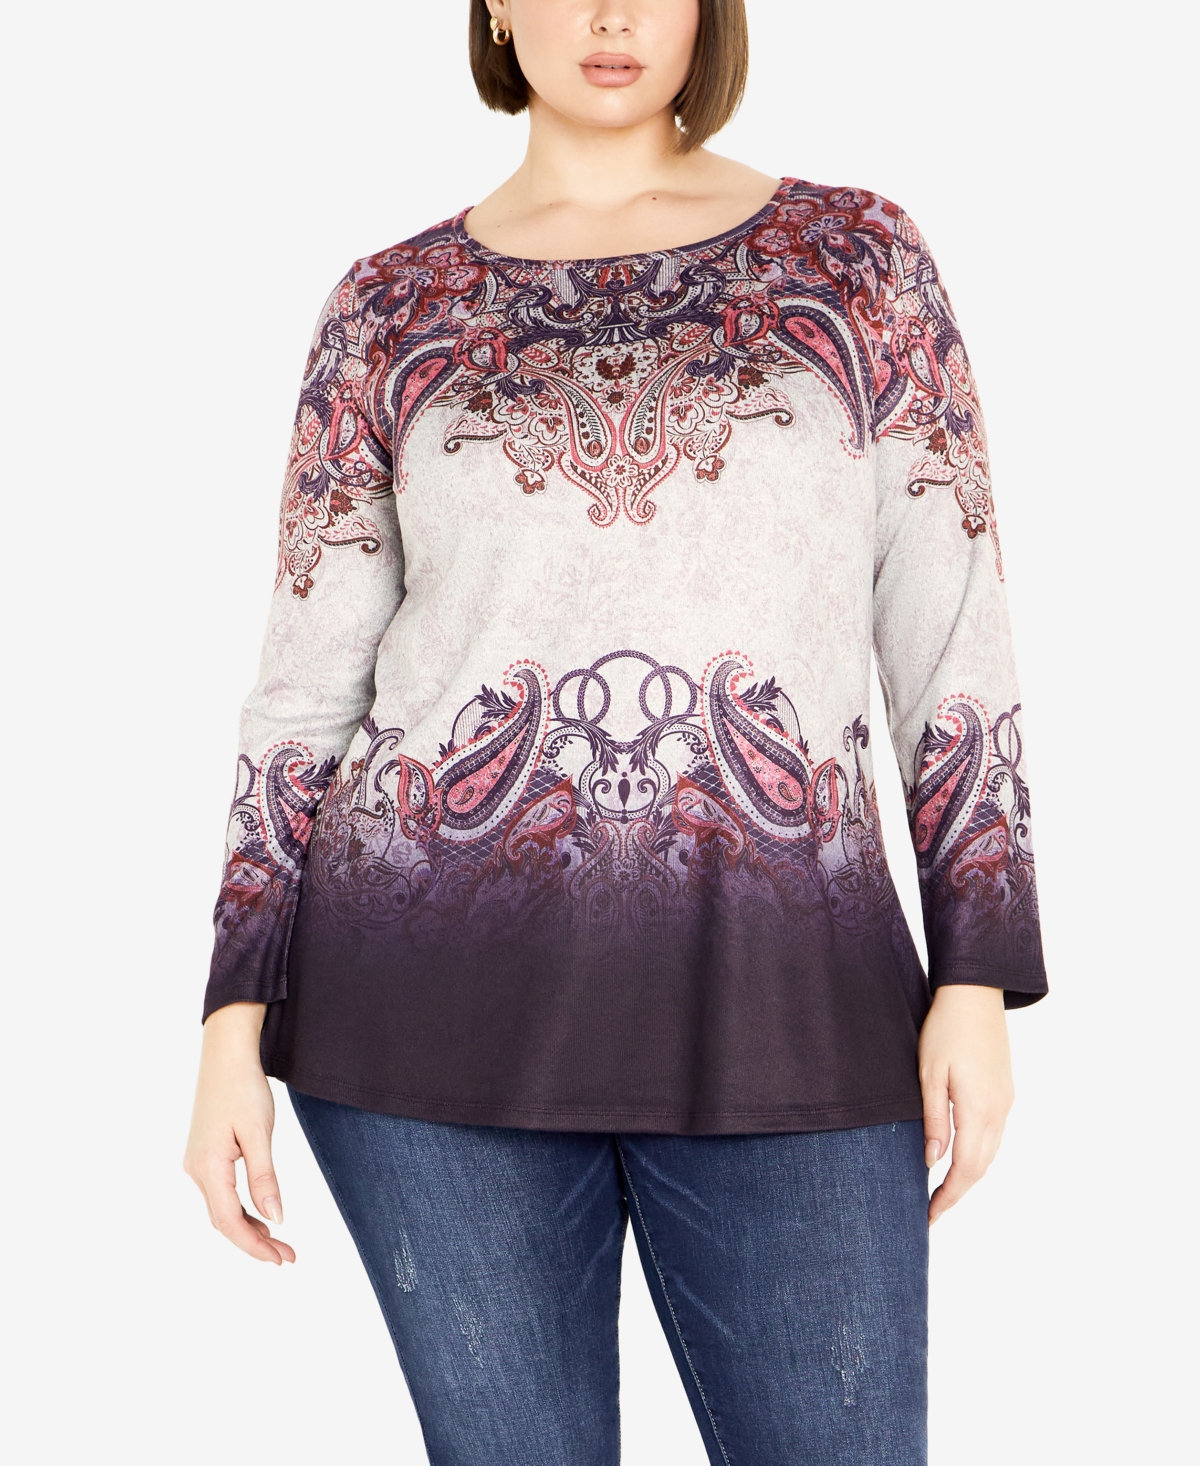 Avenue Plus Size Callie Placement Long Sleeve Top In Berry Paisley Ornate